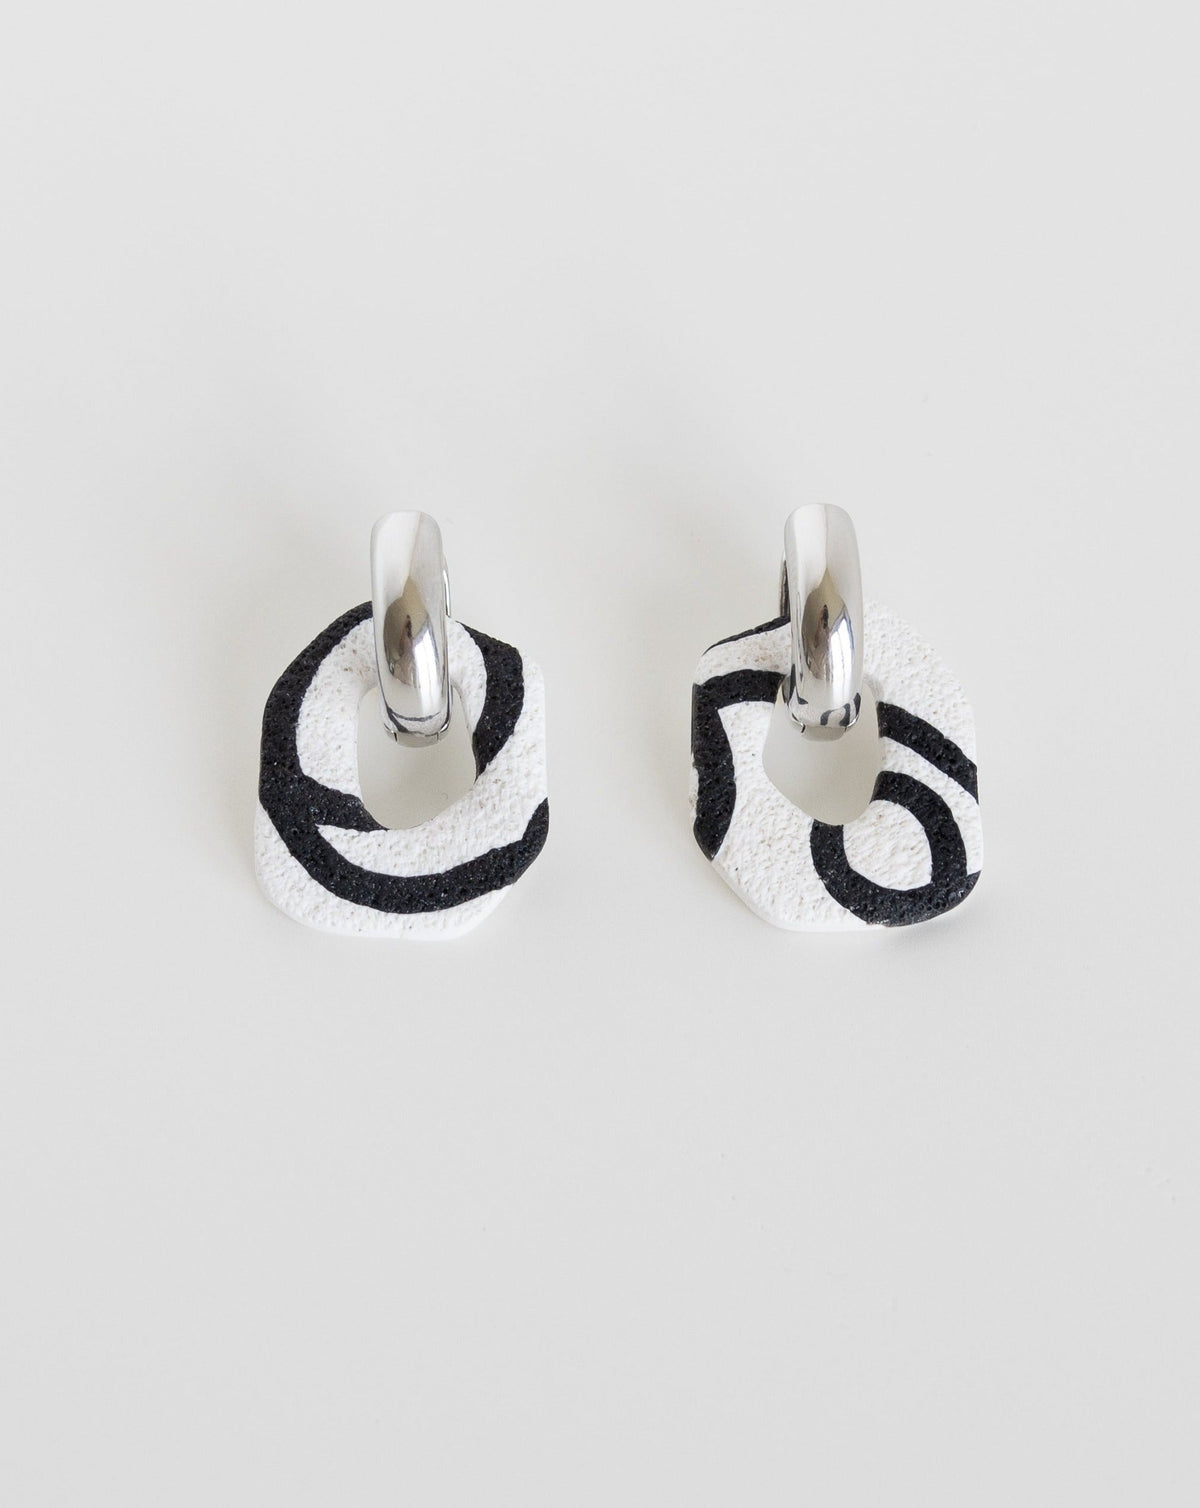 Darien earrings in Abstract White color with silver hoops, front view